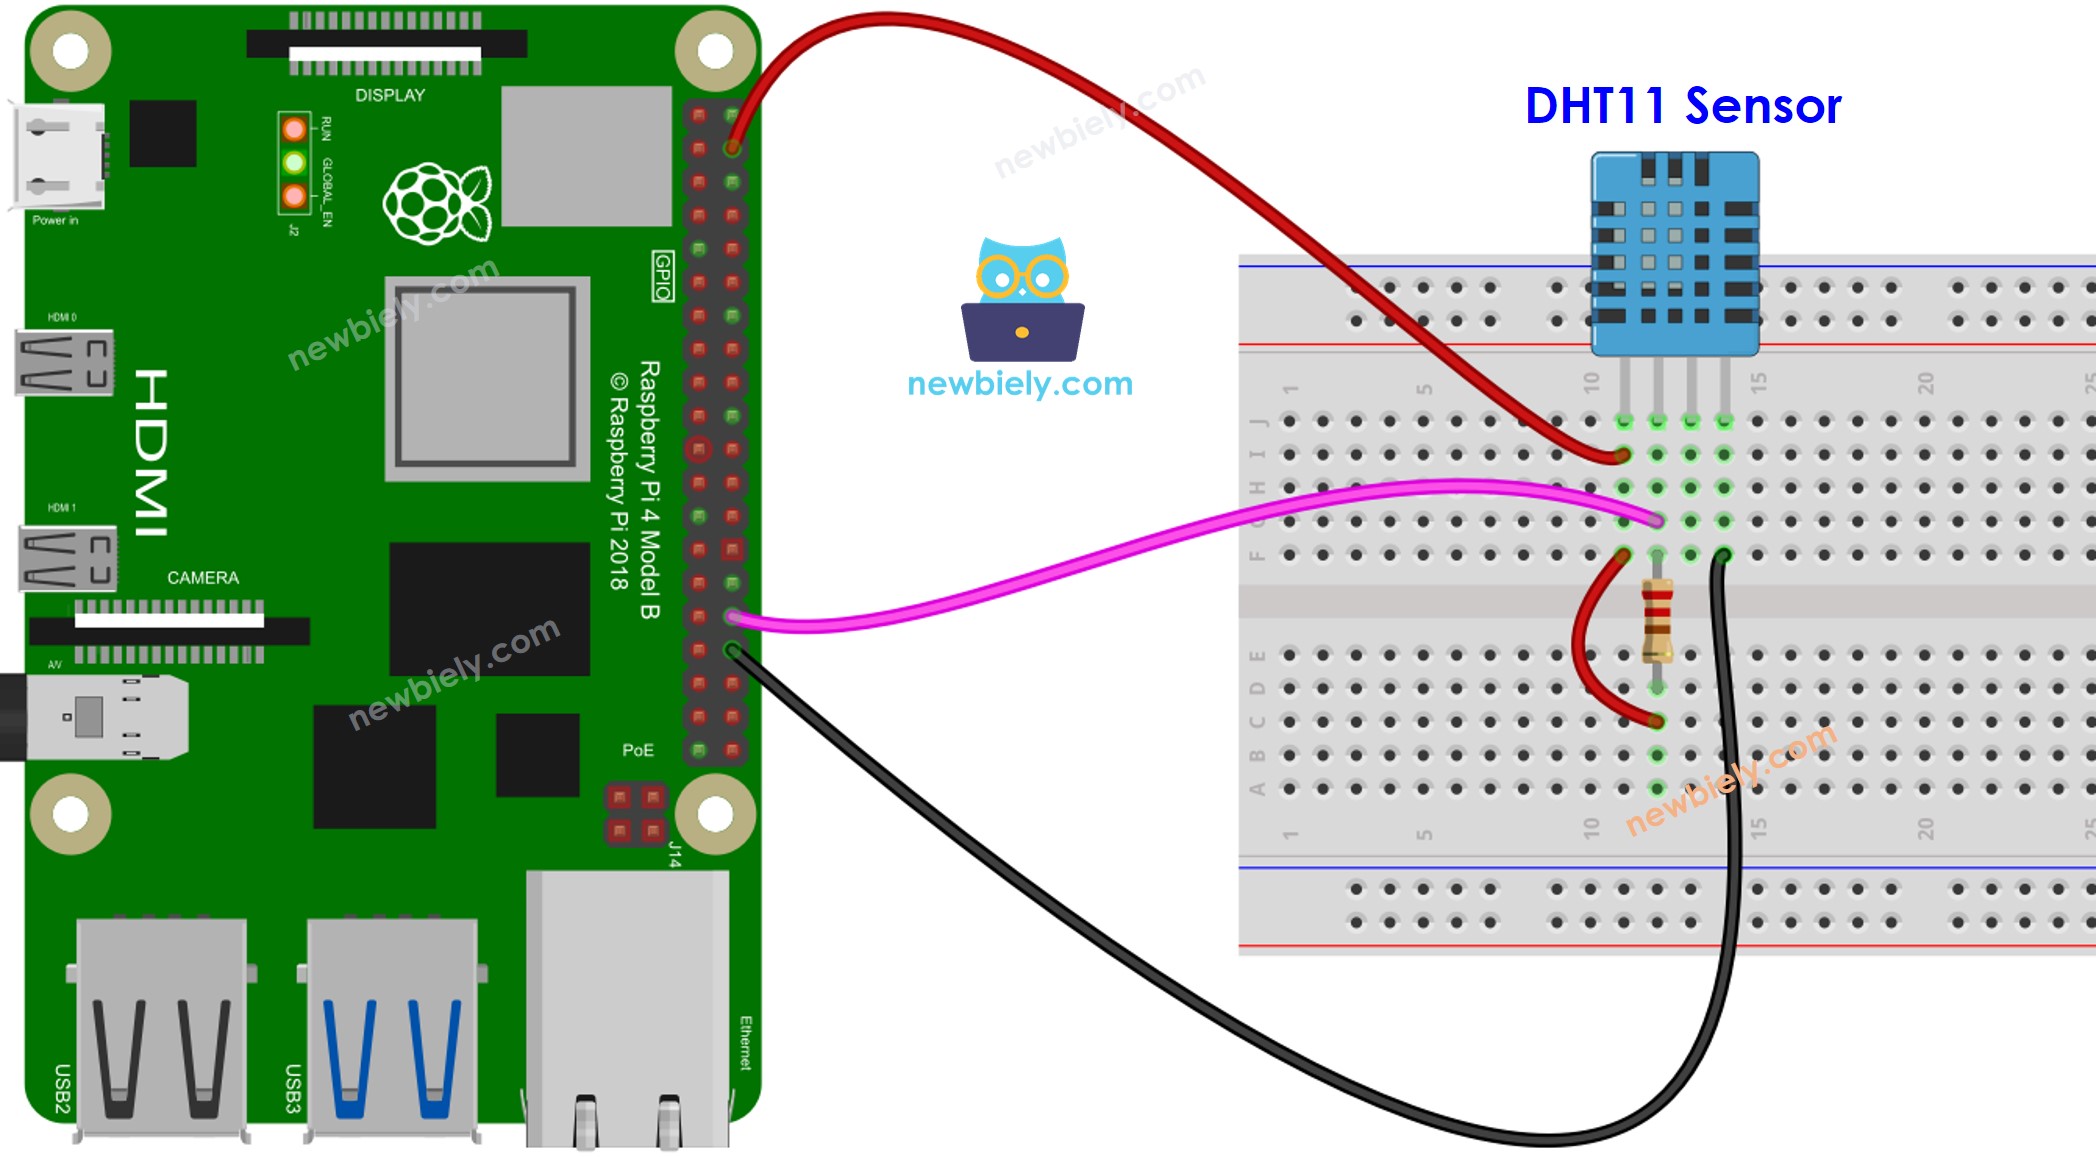 The wiring diagram between Raspberry Pi and DHT11 Temperature and humidity Sensor